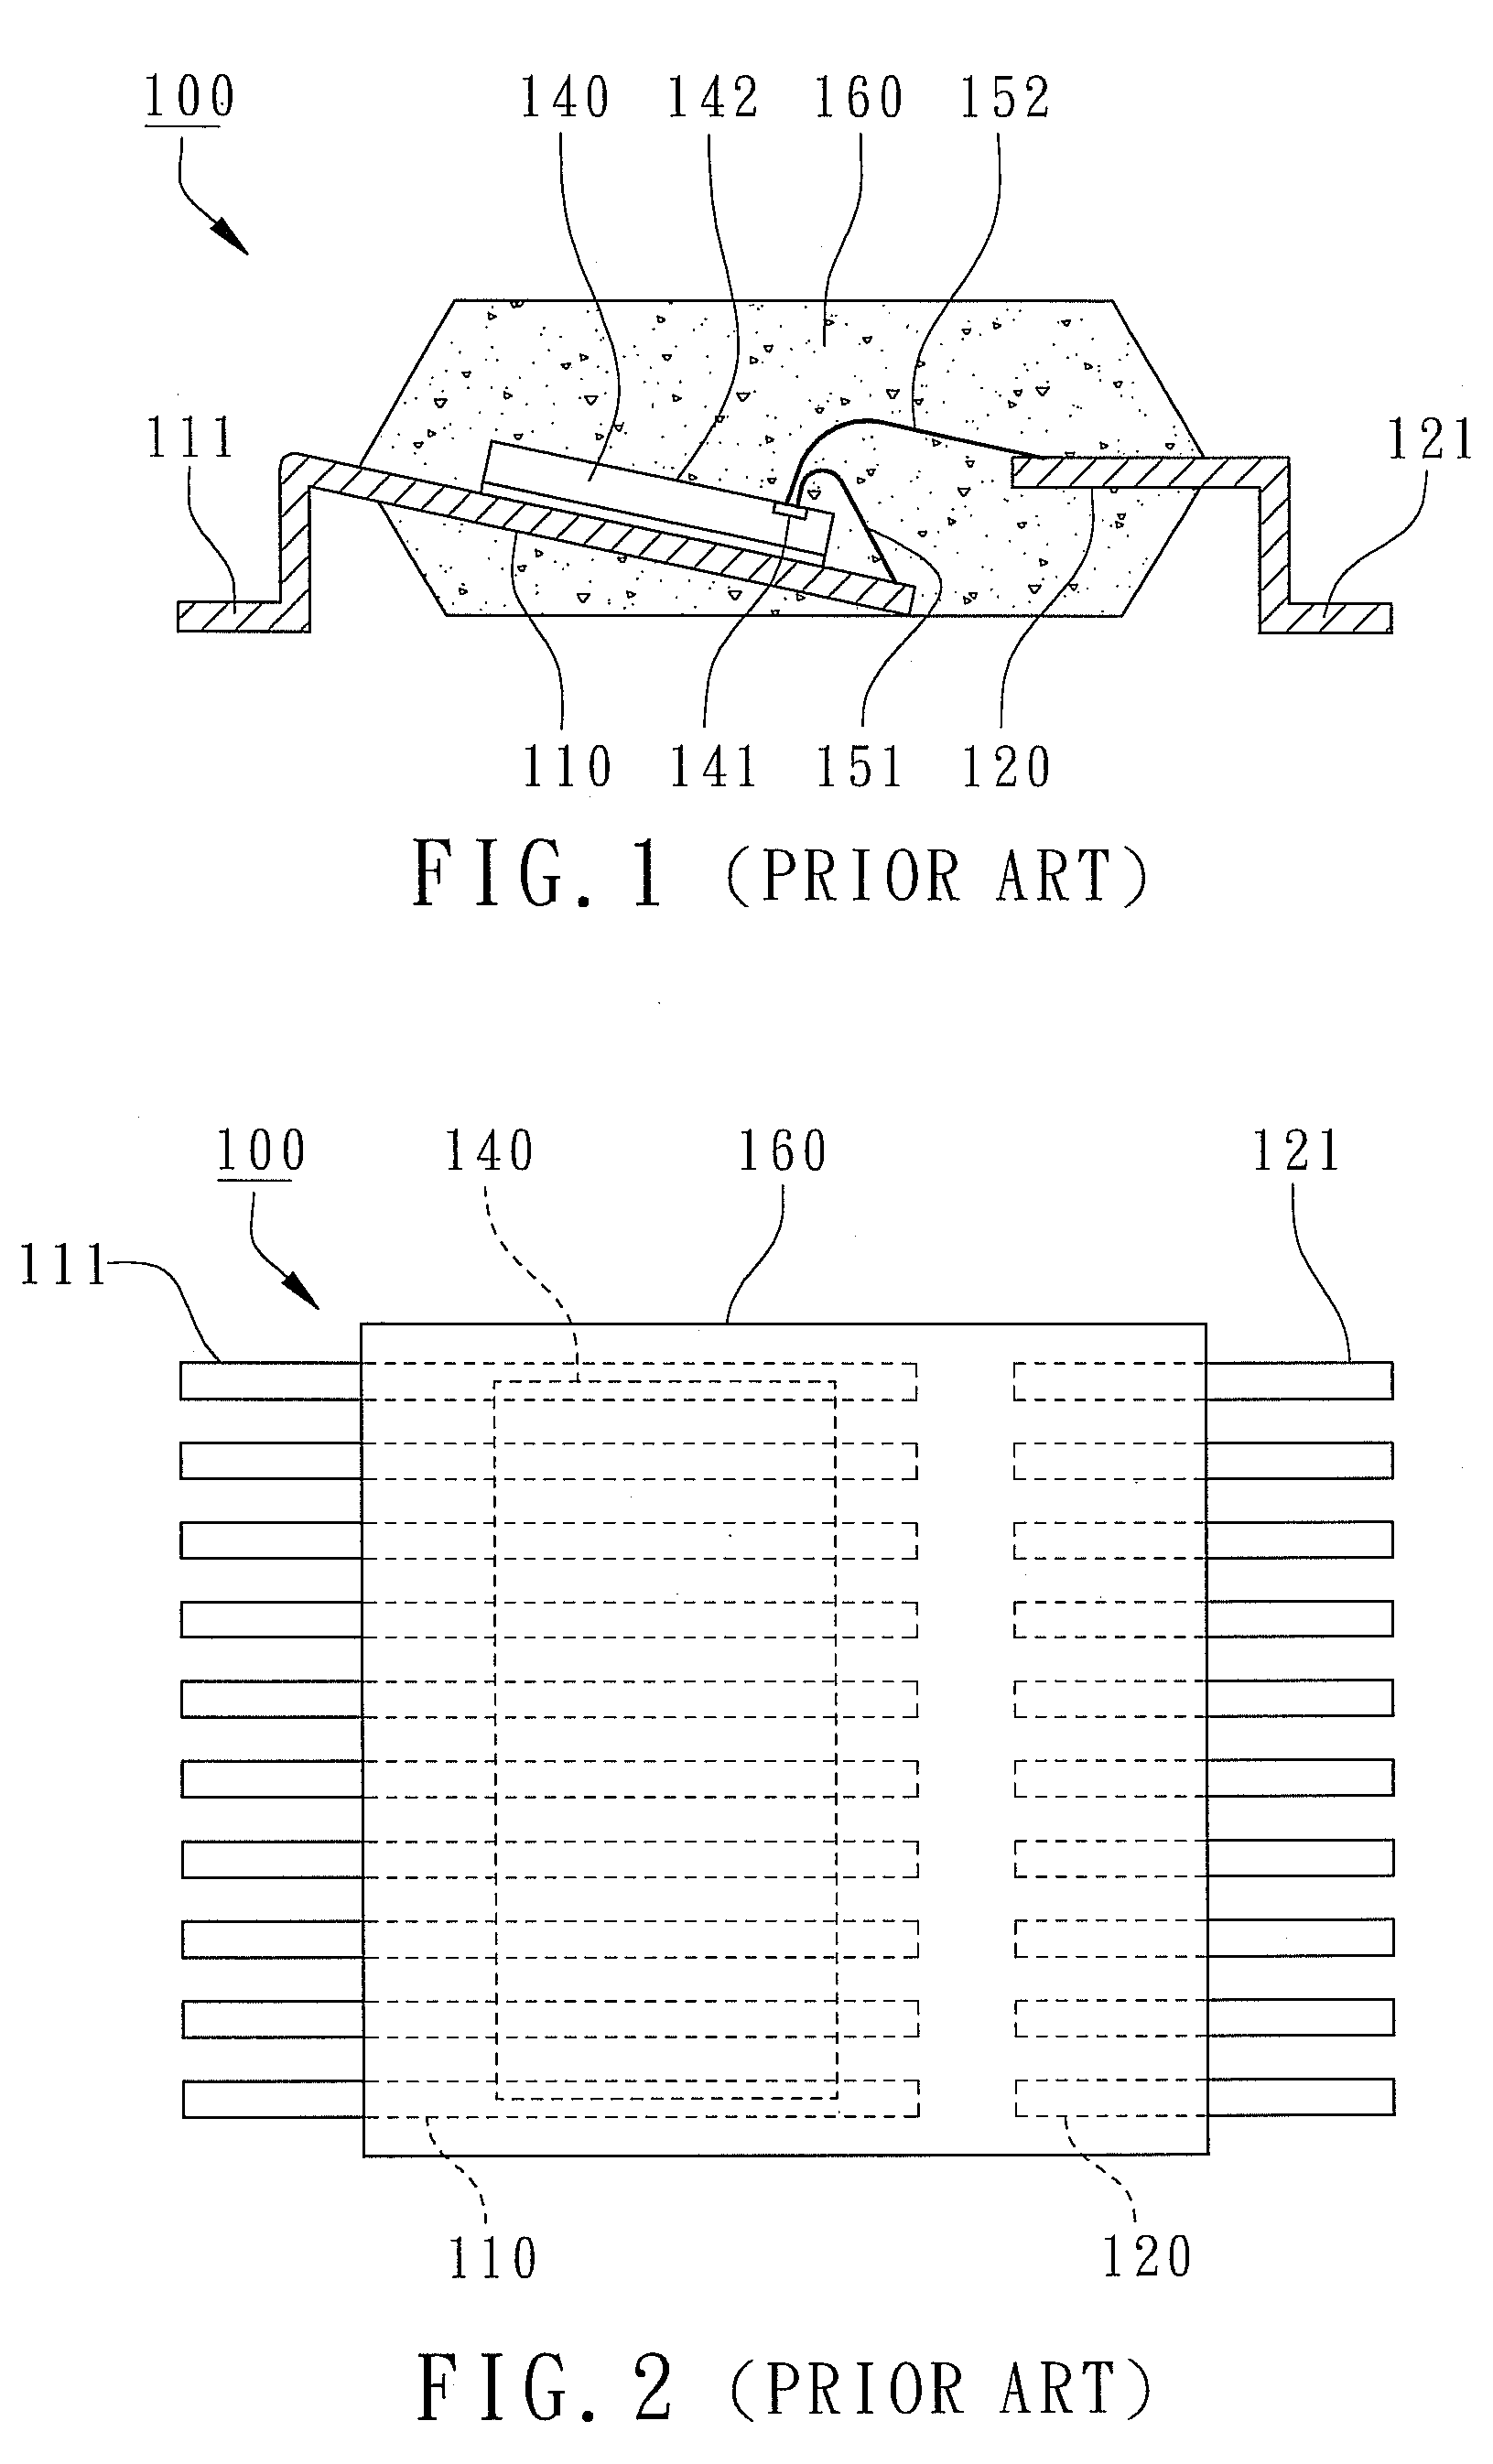 Leadframe-based semiconductor package having arched bend in a supporting bar and leadframe for the package